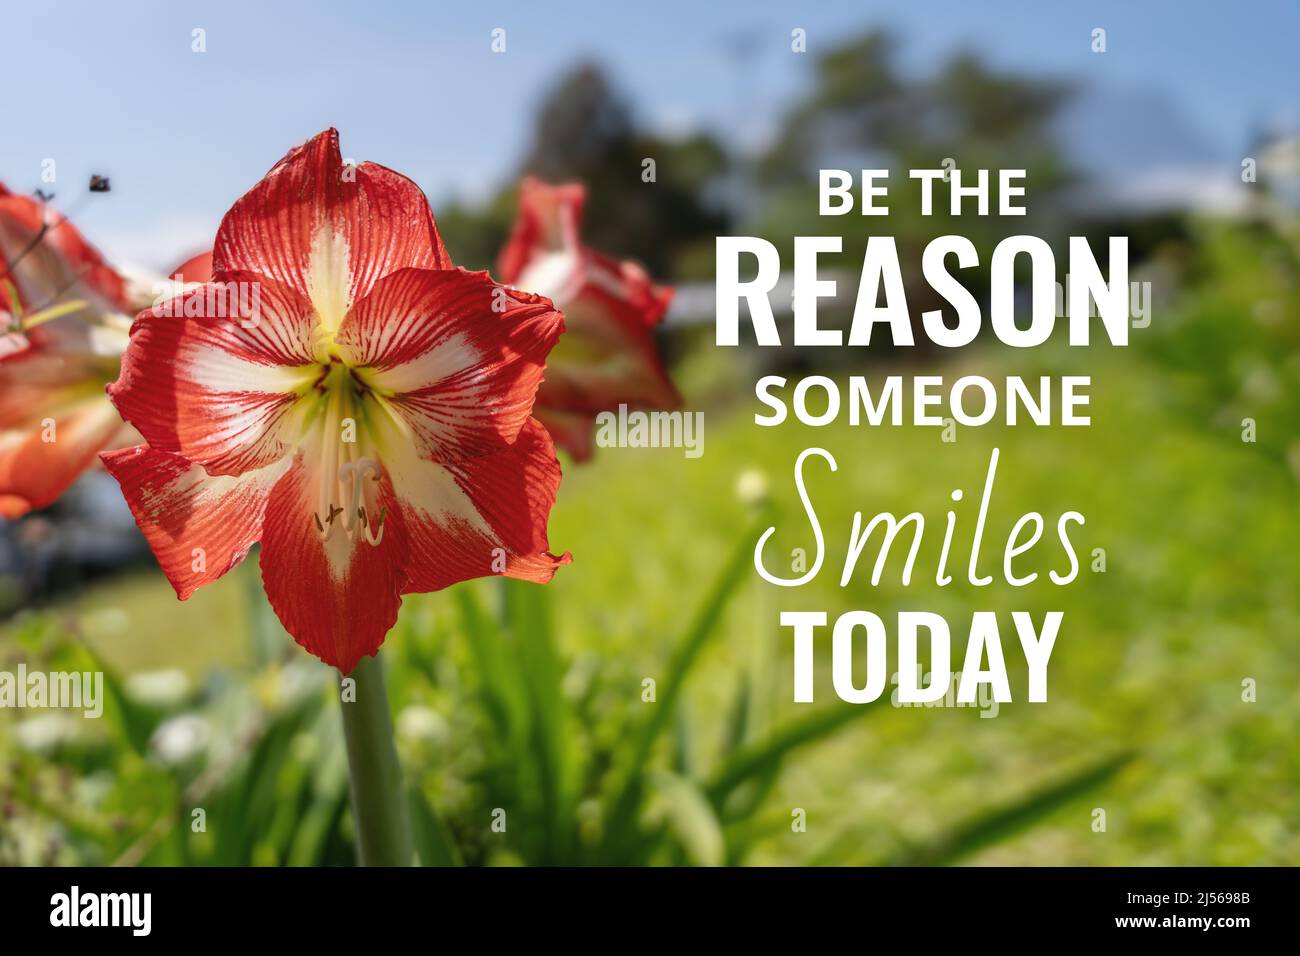 Amaryllis Flower Against Fresh Green Nature Background. Inspirational Quote. Be The Reason Someone Smiles Today. Stock Photo